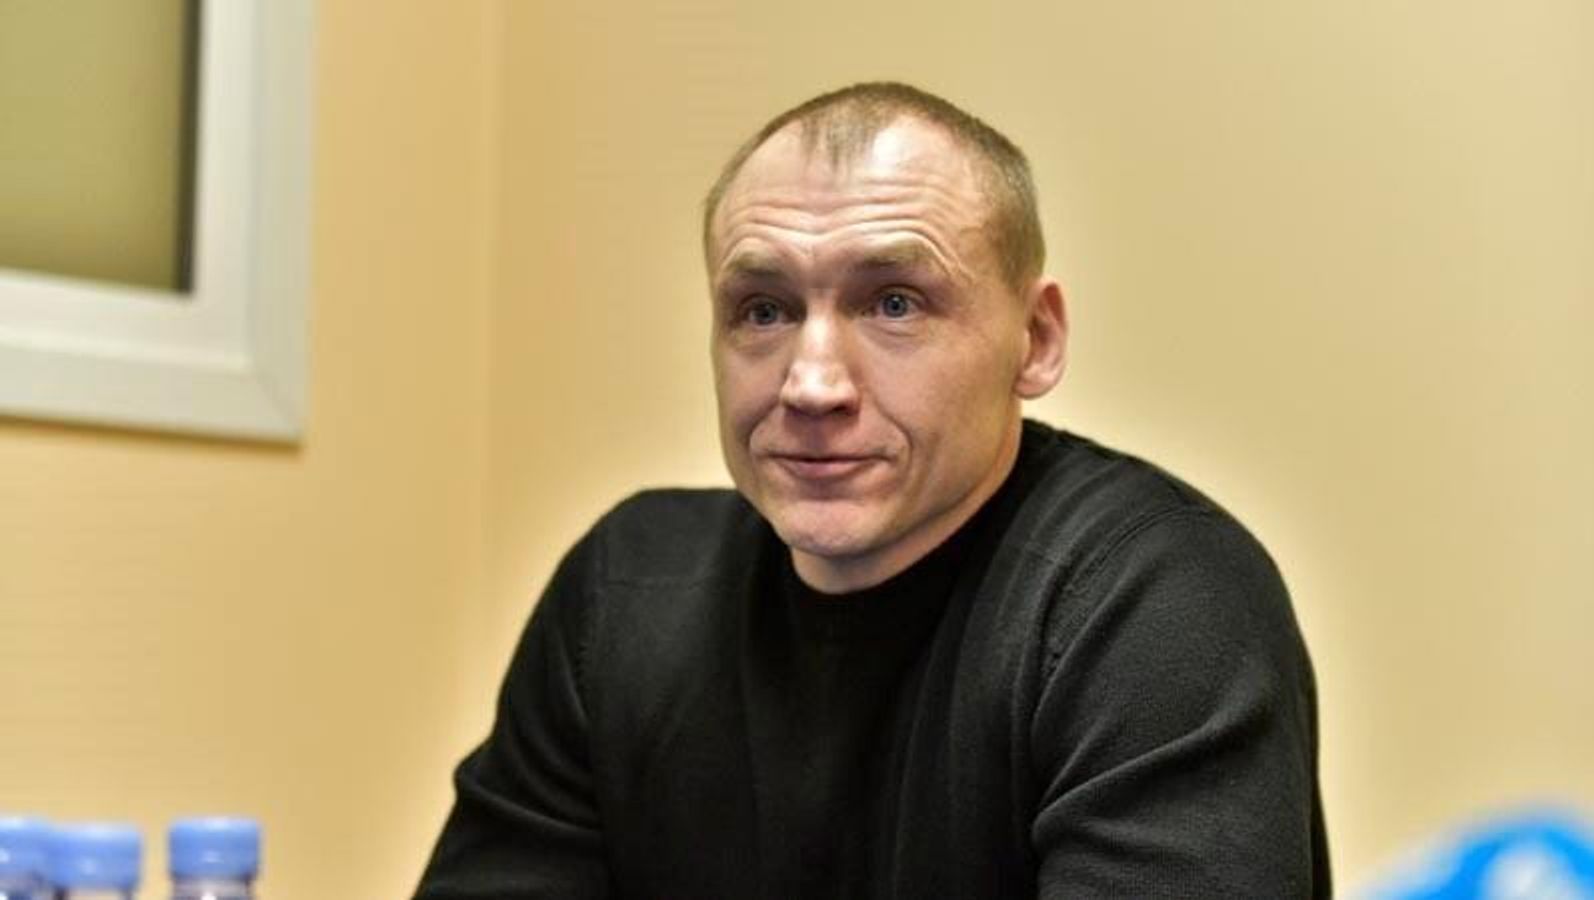 Eston Kohver at a press conference in Tartu after his exchange for Russian spy Aleksei Dressen on September 26, 2015